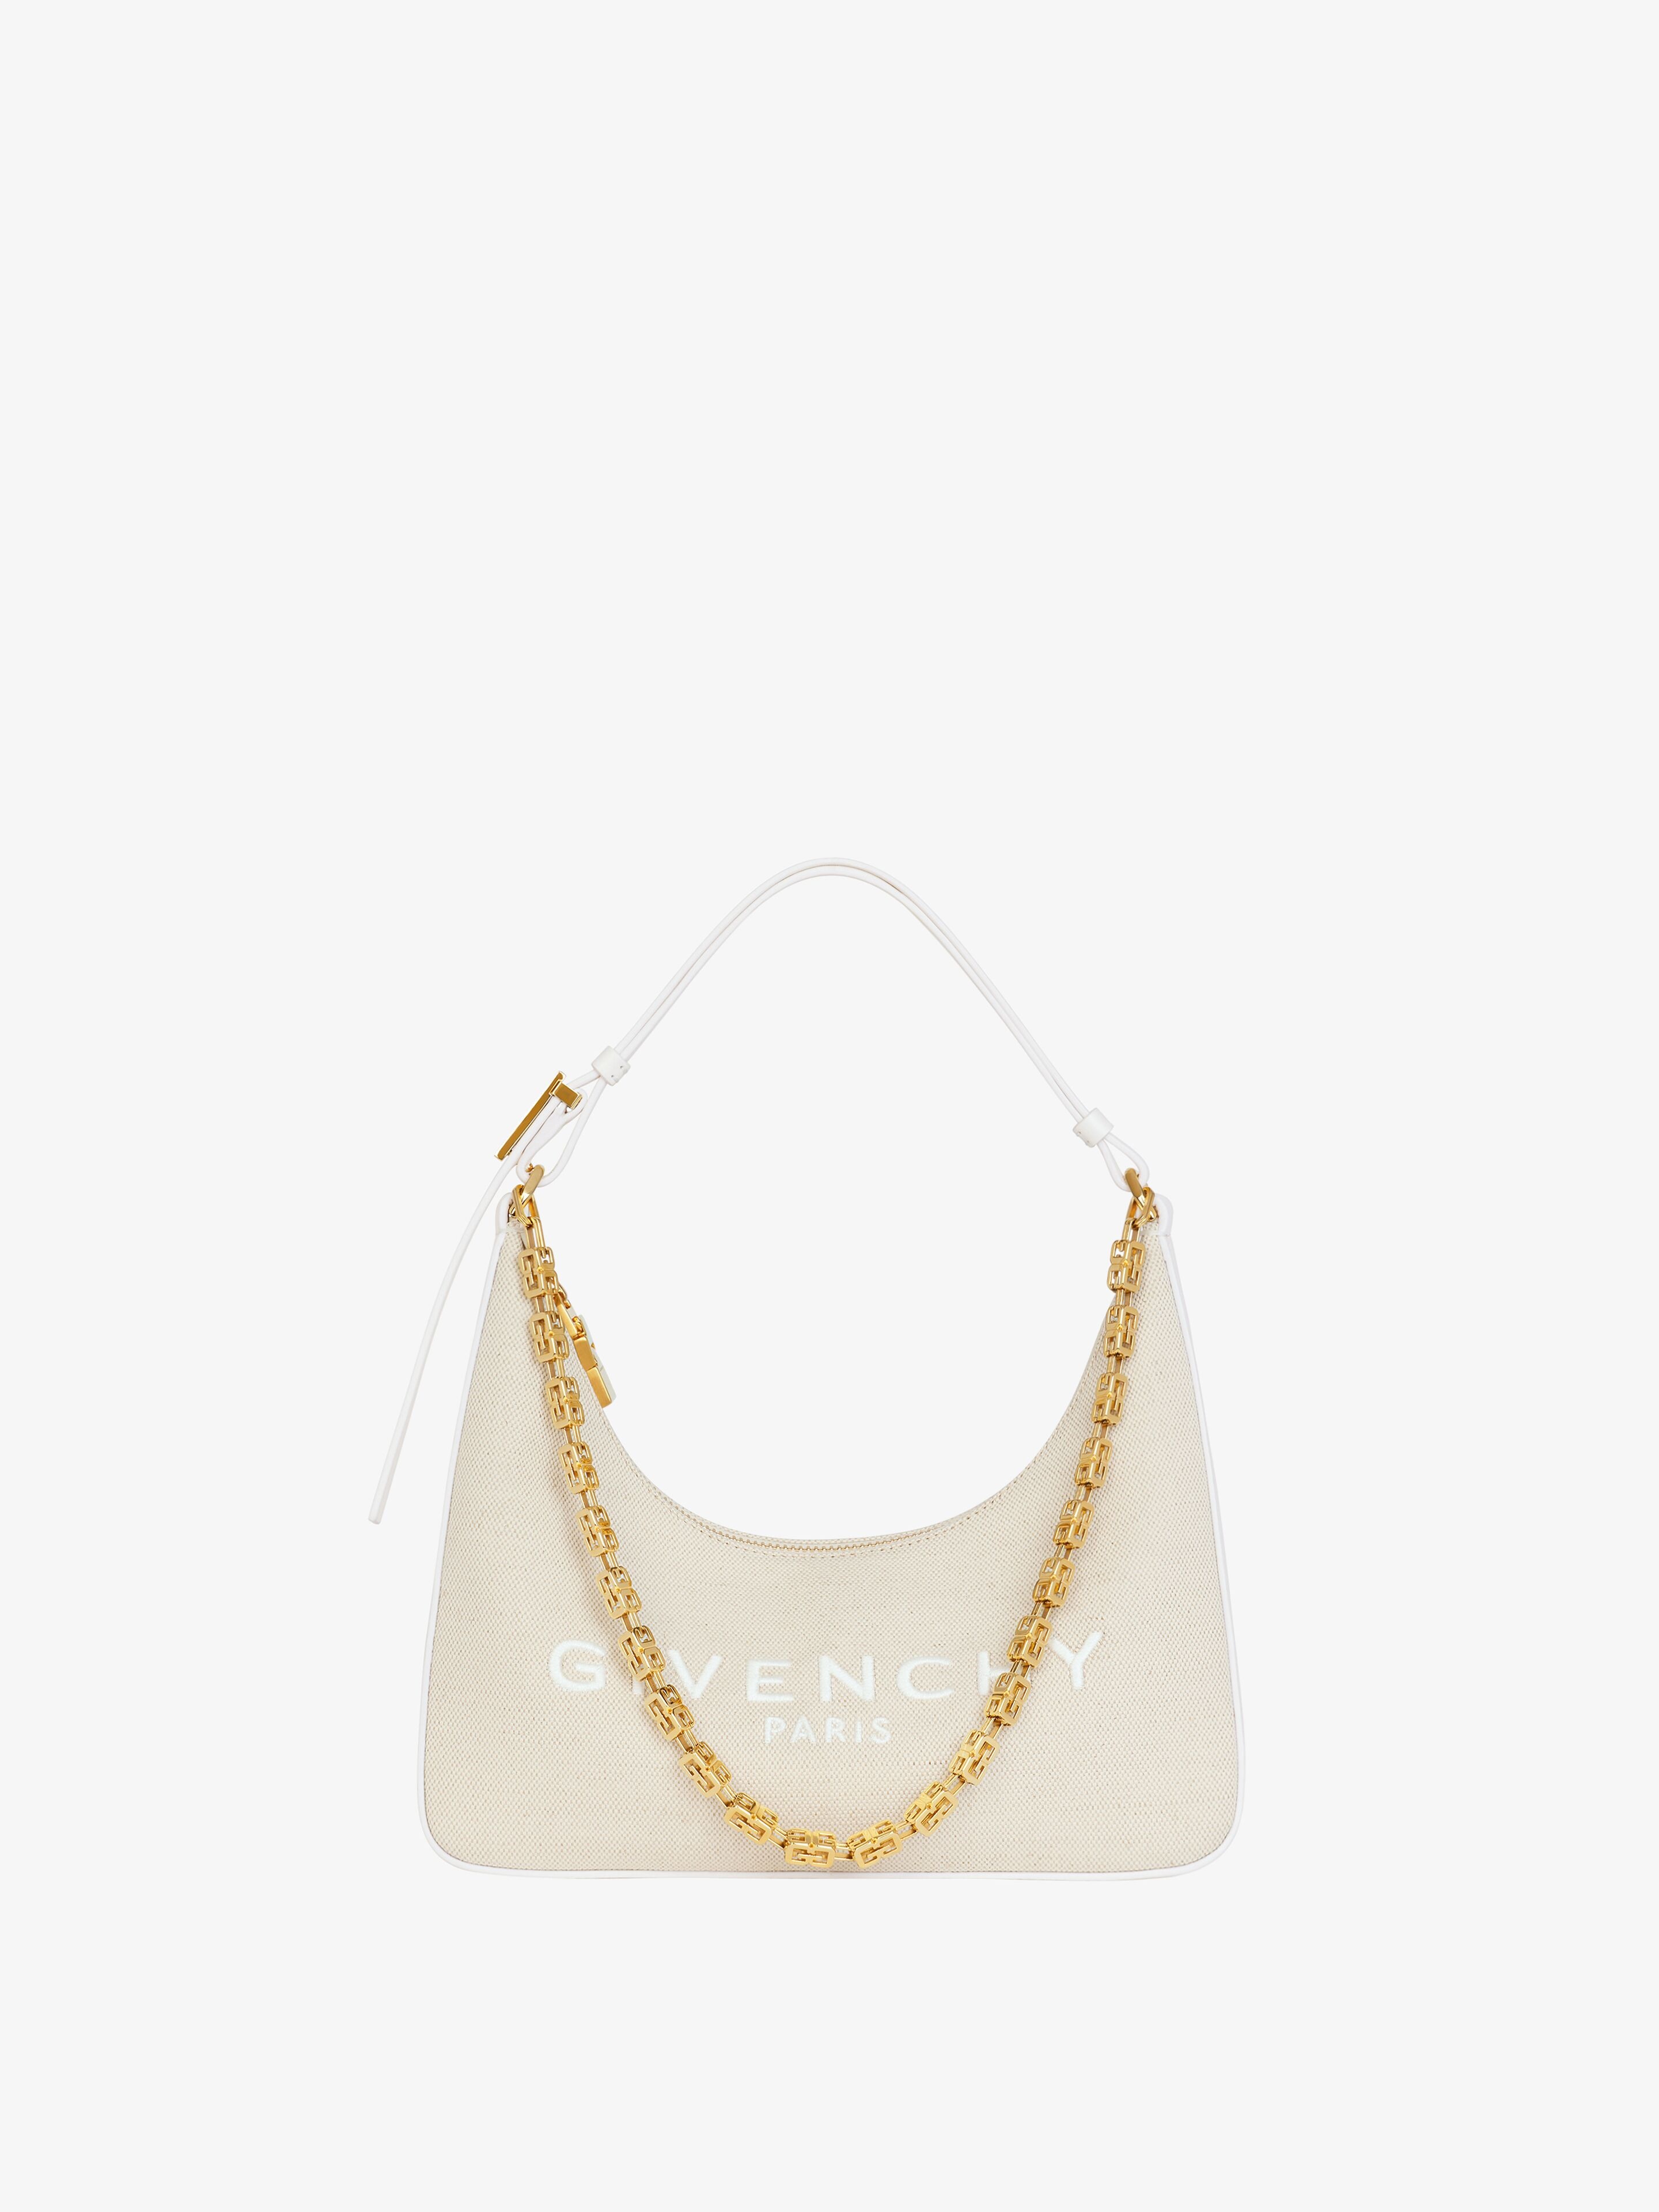 Givenchy Small Moon Cut Out Bag In Canvas With Chain In Multicolor